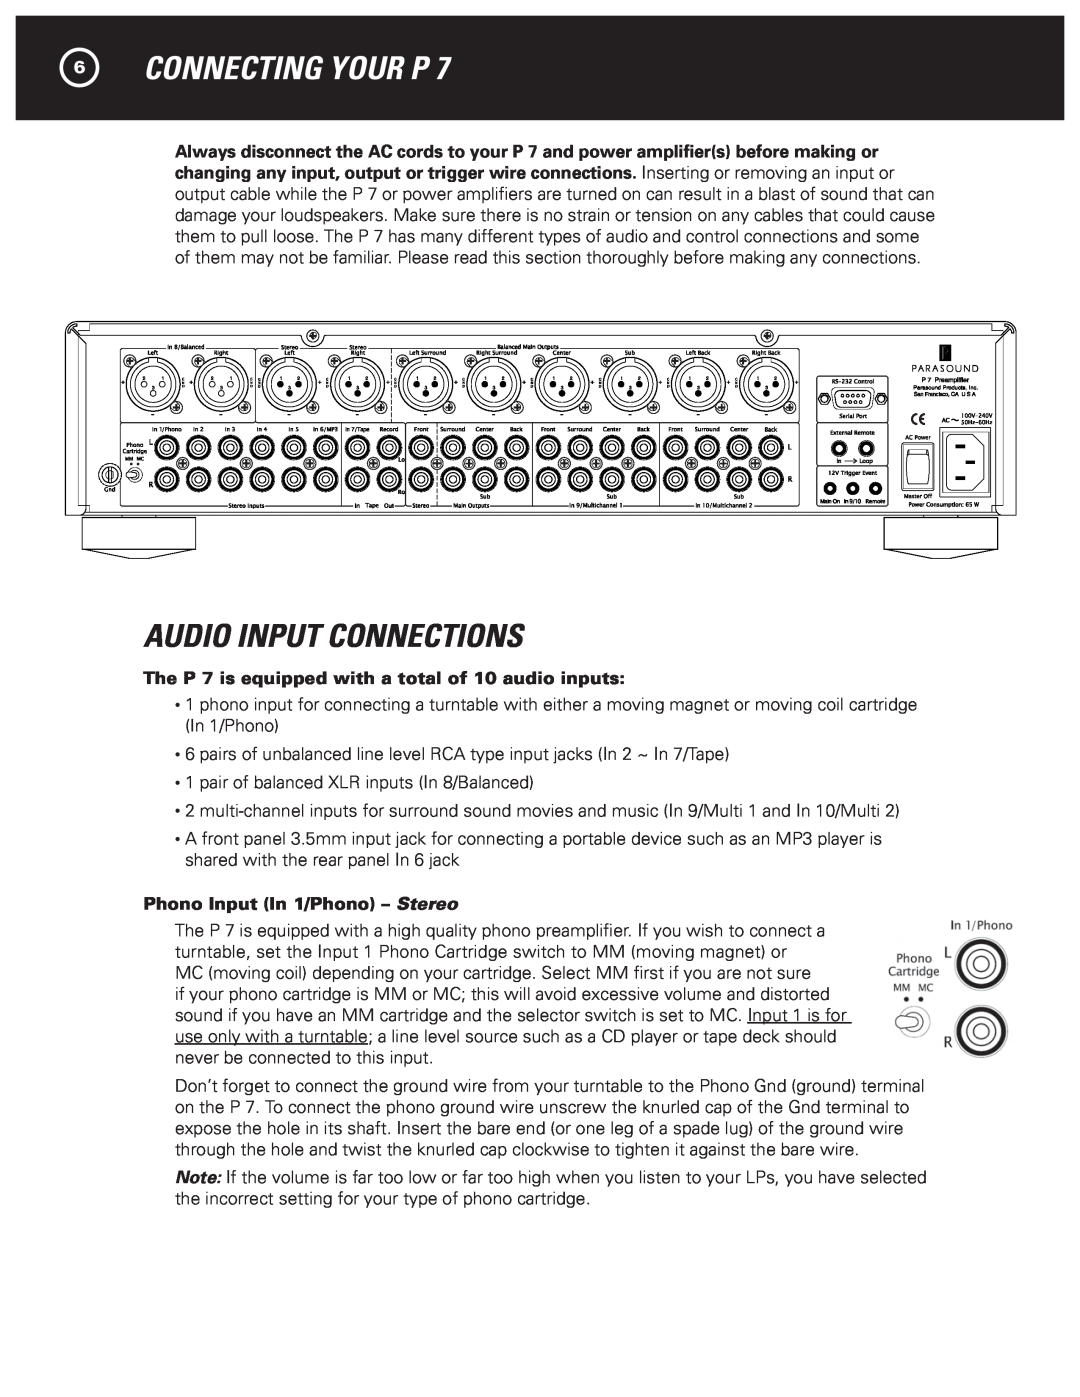 Parasound P 7 manual 6CONNECTING YOUR P, Audio Input Connections, Phono Input In 1/Phono - Stereo 